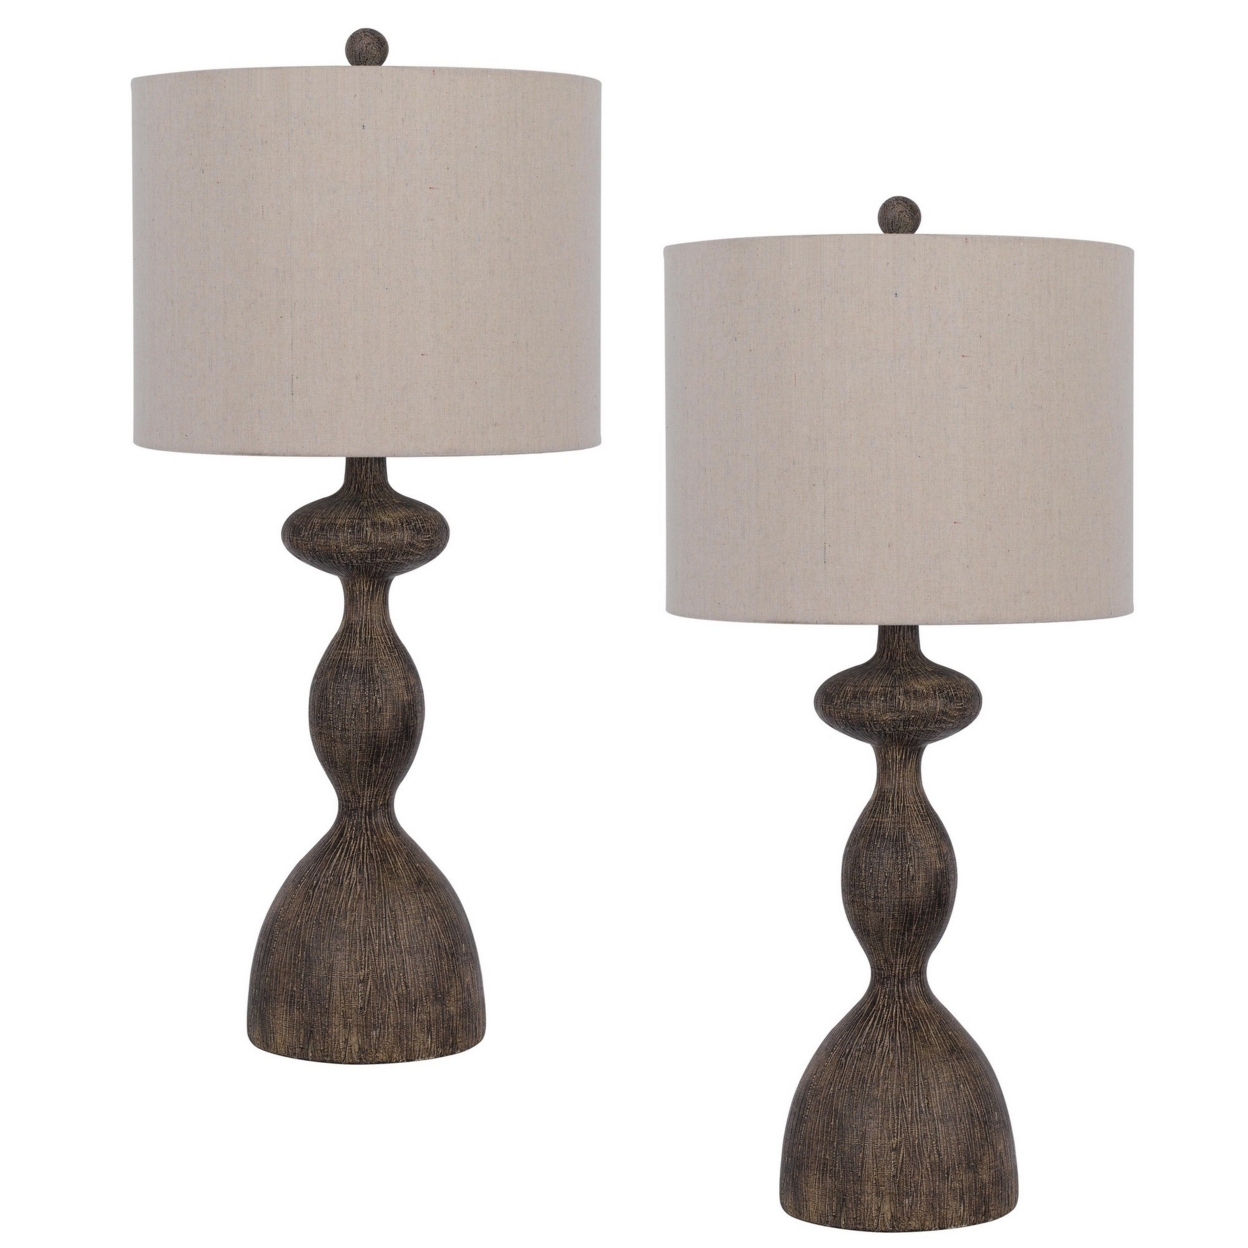 30 Inch 2 Table Lamps, Resin Accent, Turned Base, Rustic Wood Brown, Beige- Saltoro Sherpi